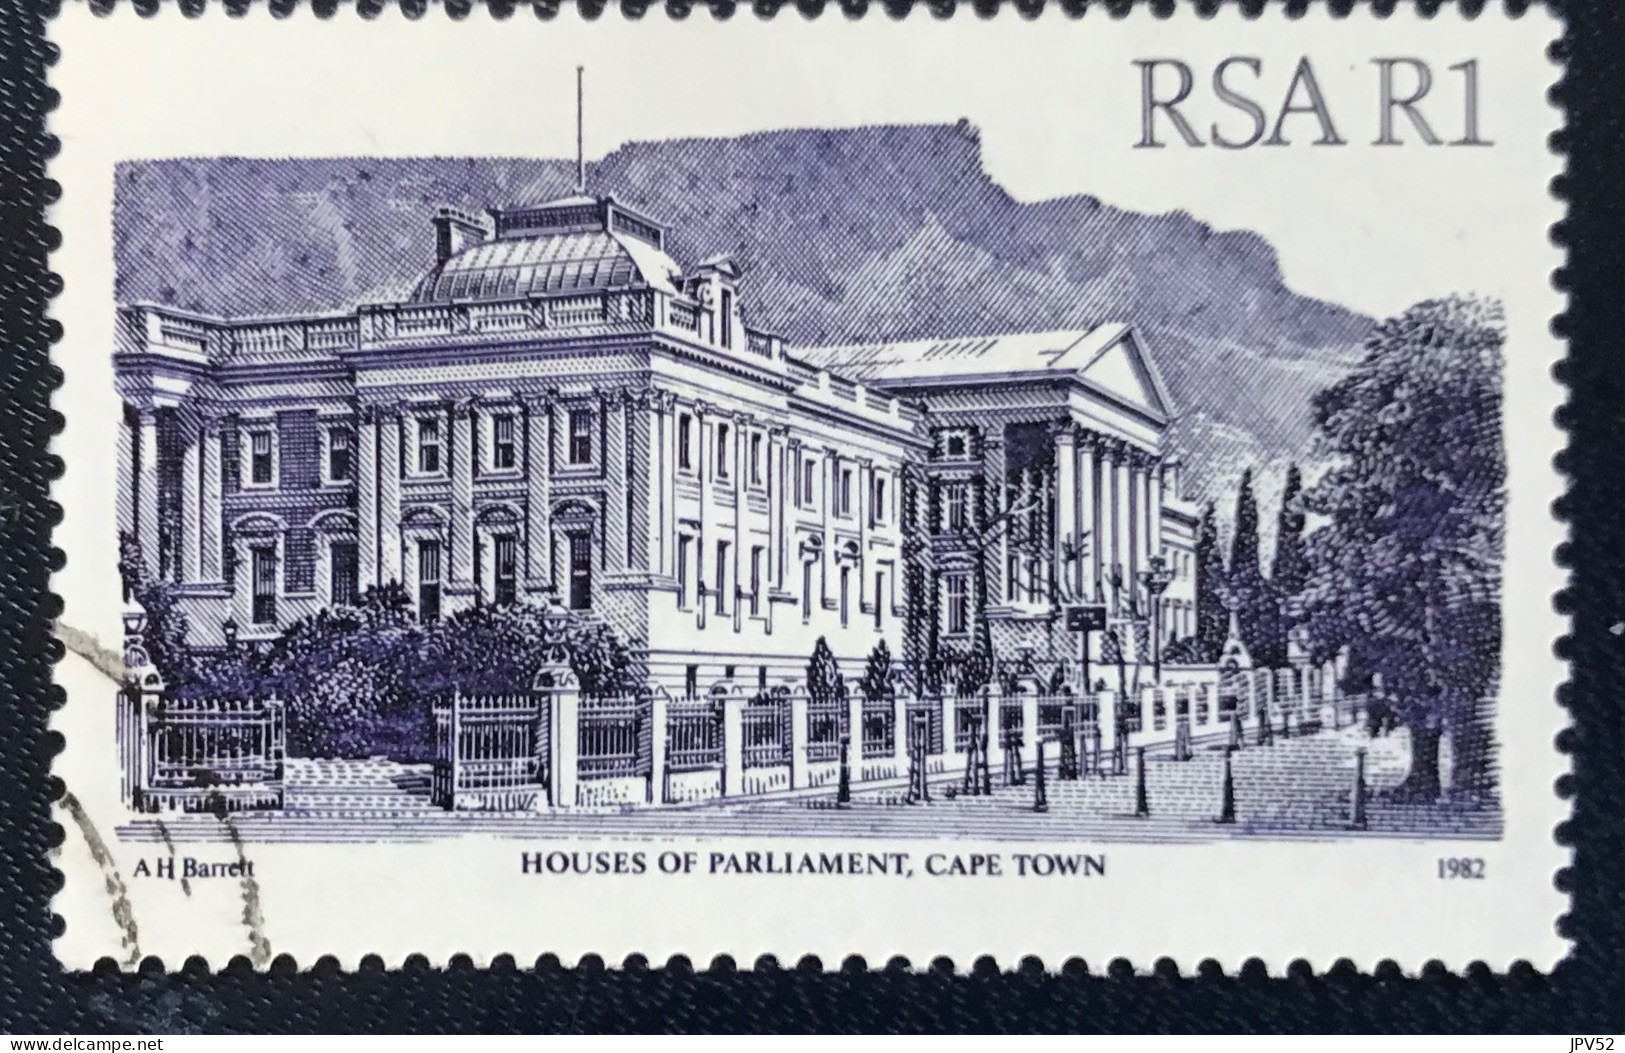 RSA - South Africa - Suid-Afrika  - C18/6 - 1986 - (°)used - Michel 616 - Parlementsgebouw Kaapstad - Used Stamps